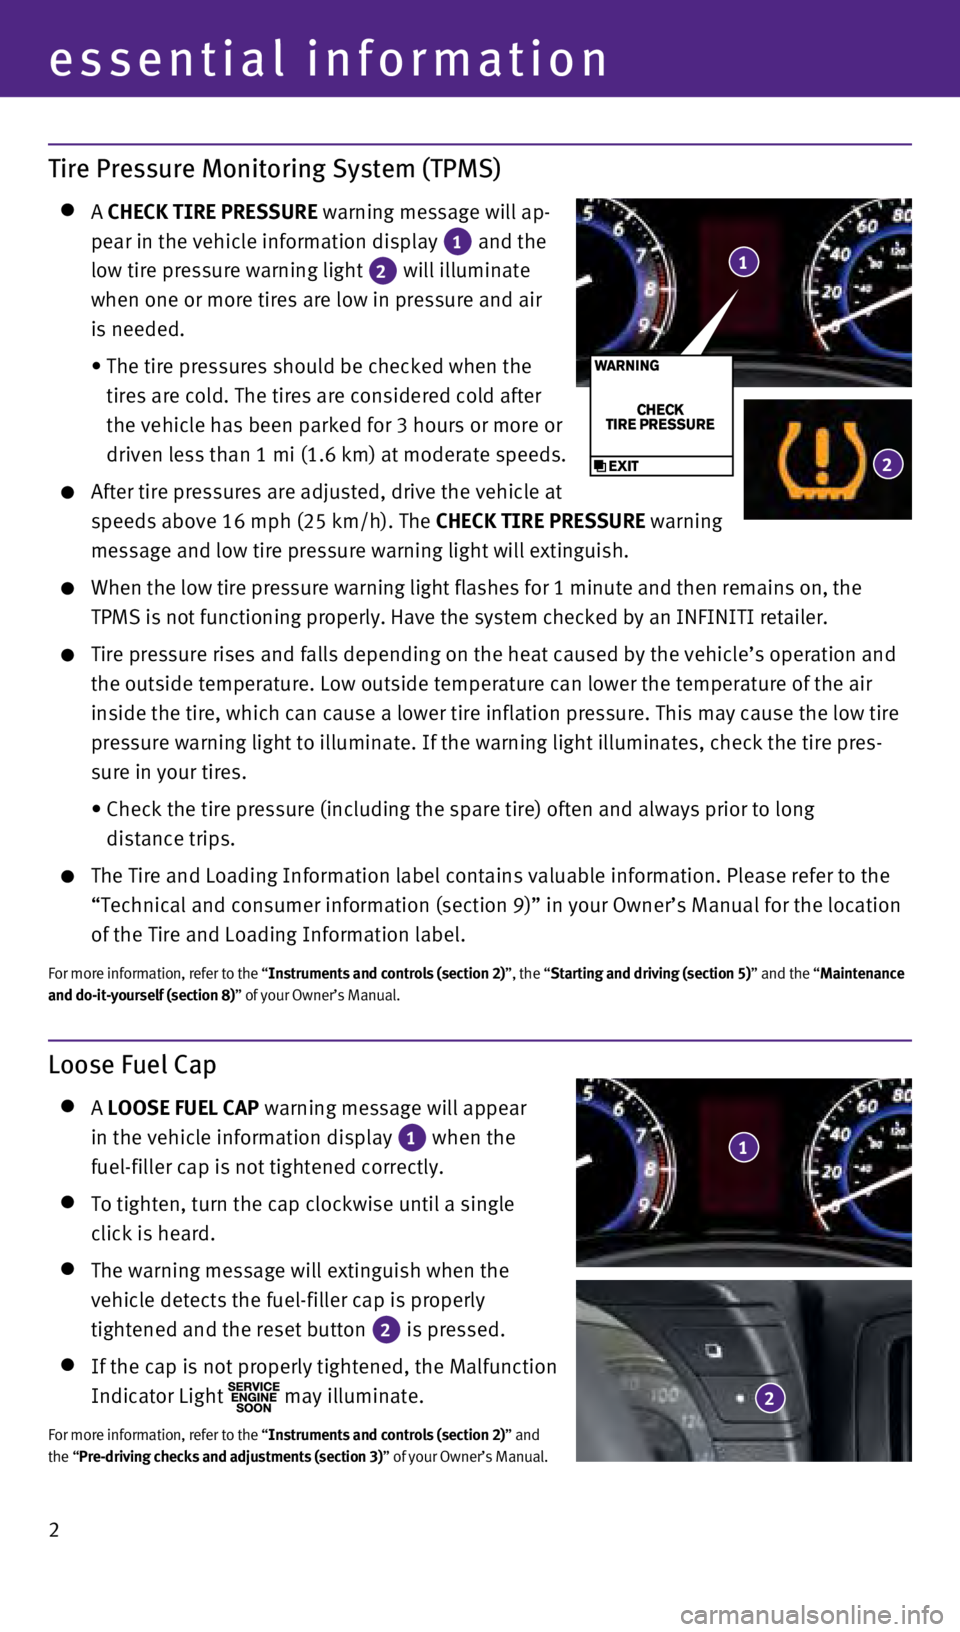 INFINITI Q40 2015  Quick Reference Guide 2
Loose Fuel Cap
   A LOOSE FUEL CAP warning message will appear  
in the vehicle information display
 
1 when the  
fuel-filler cap is not tightened correctly. 
    To tighten, turn the cap clockwise